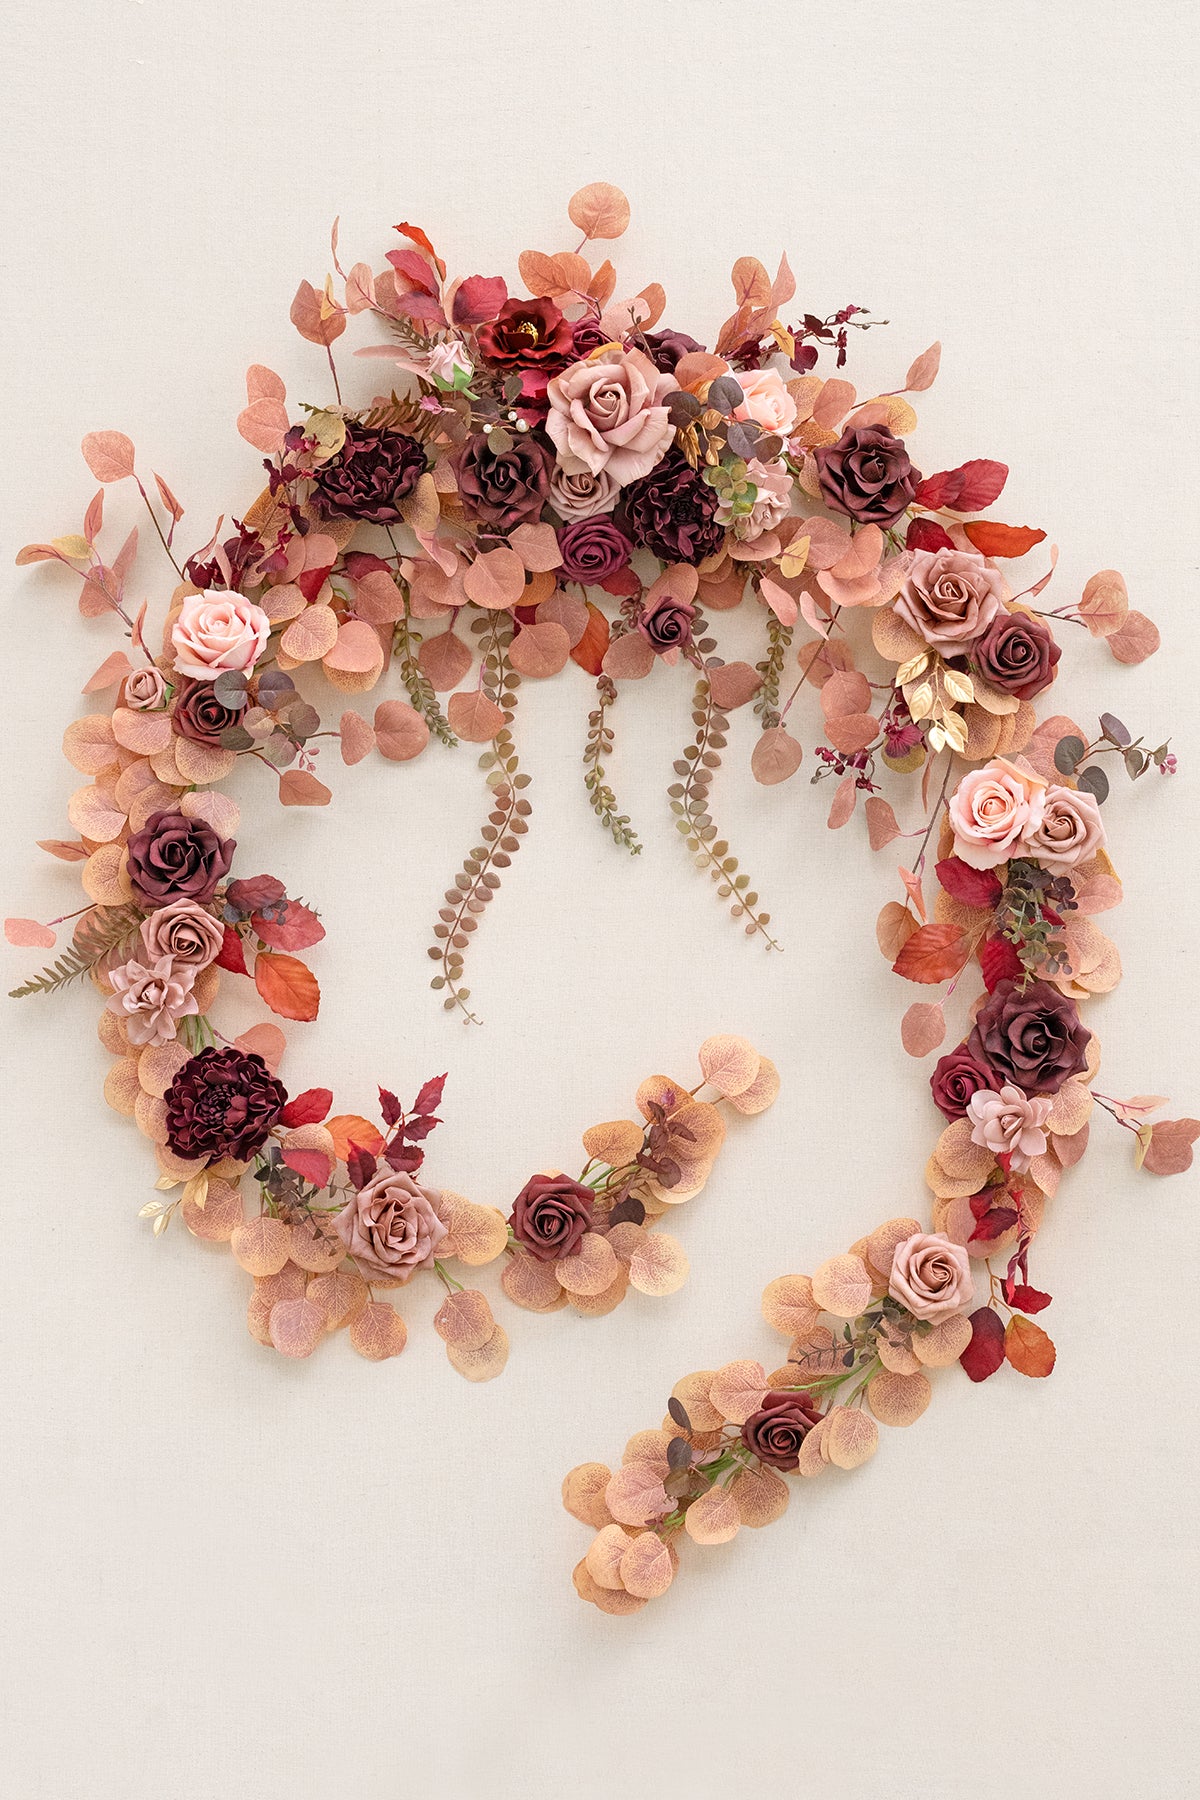 Flash Sale | 9ft Head Table Flower Garland in Burgundy & Dusty Rose | Clearance